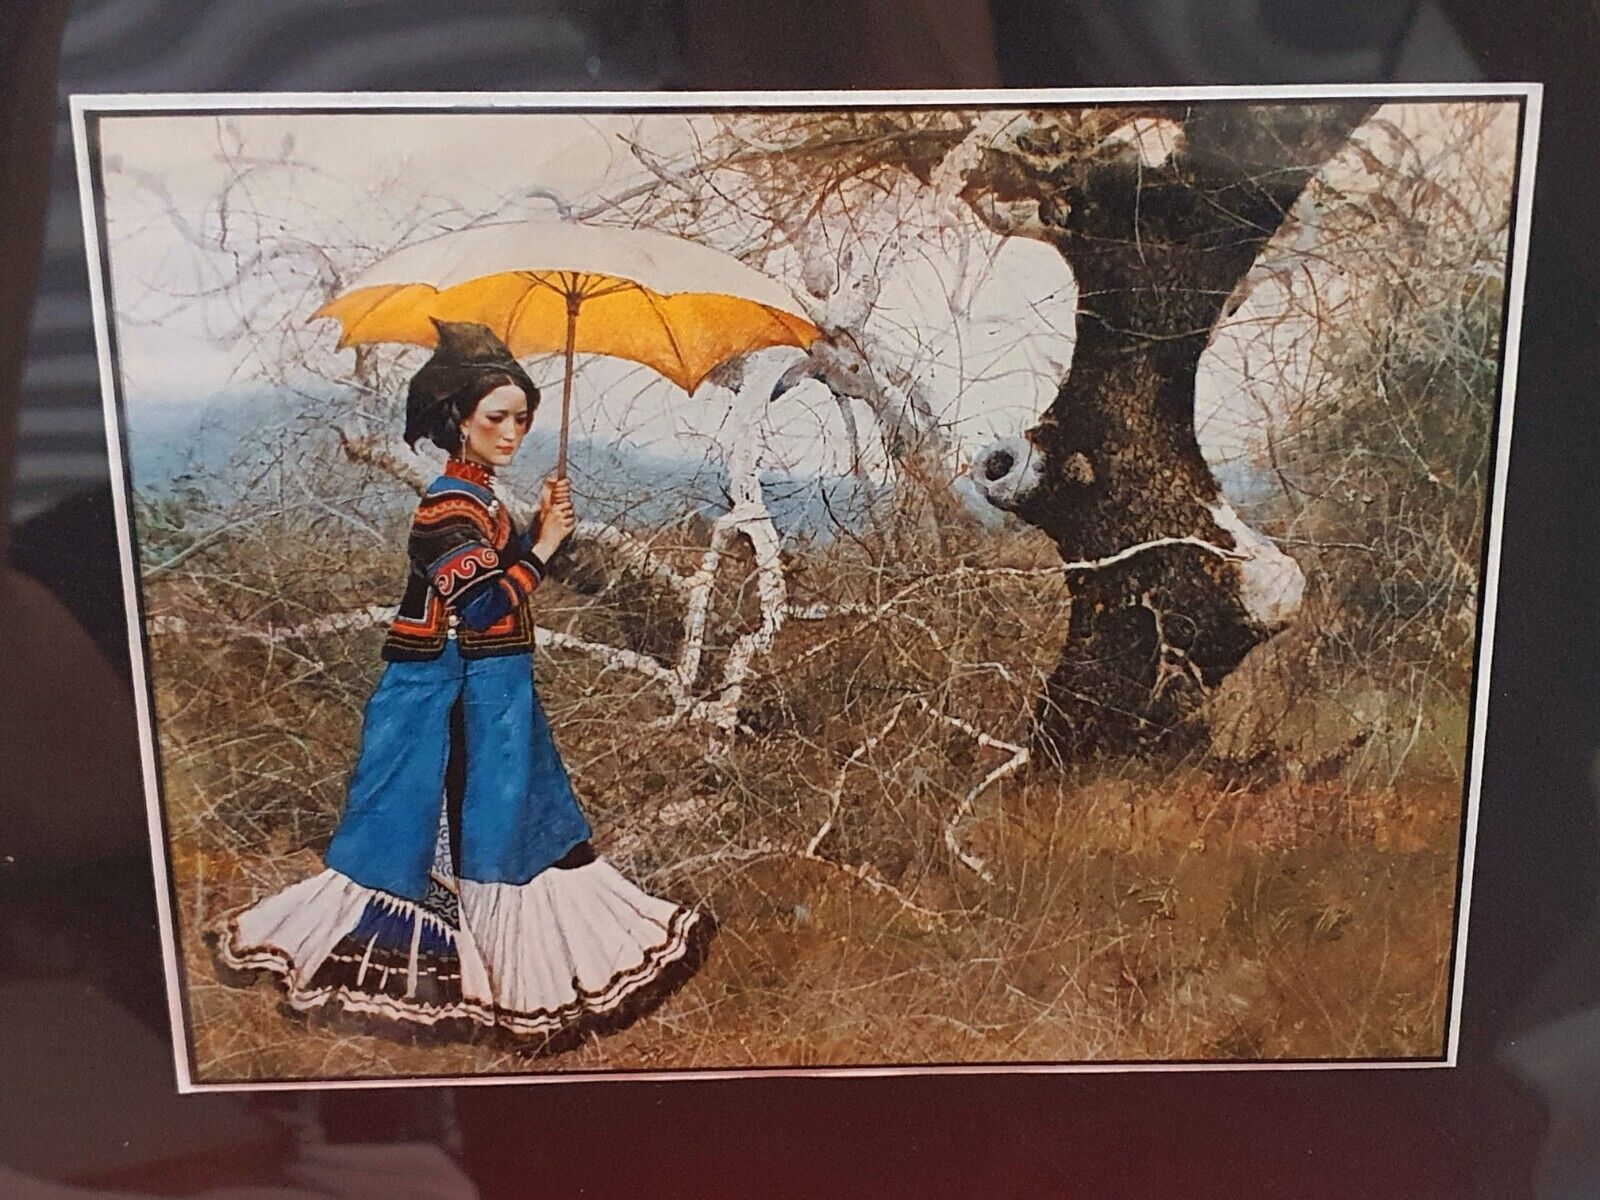 Chinese Artist Gao Xiao-Hua Reproduction Prints of Paintings of Yi Ethnic Group Без бренда - фотография #12